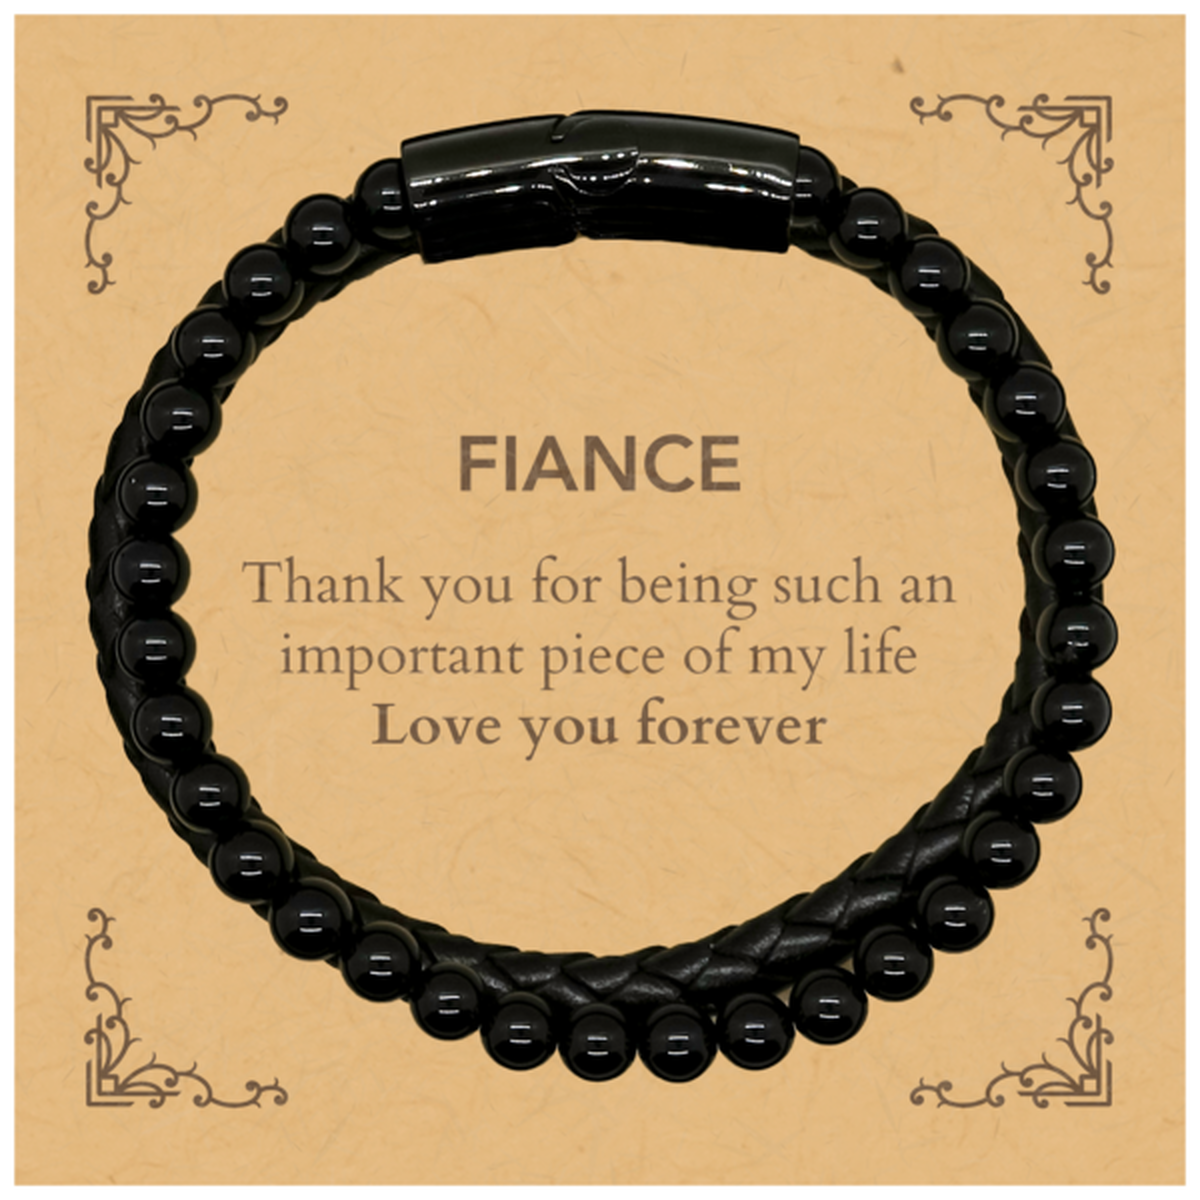 Appropriate Fiance Stone Leather Bracelets Epic Birthday Gifts for Fiance Thank you for being such an important piece of my life Fiance Christmas Mothers Fathers Day